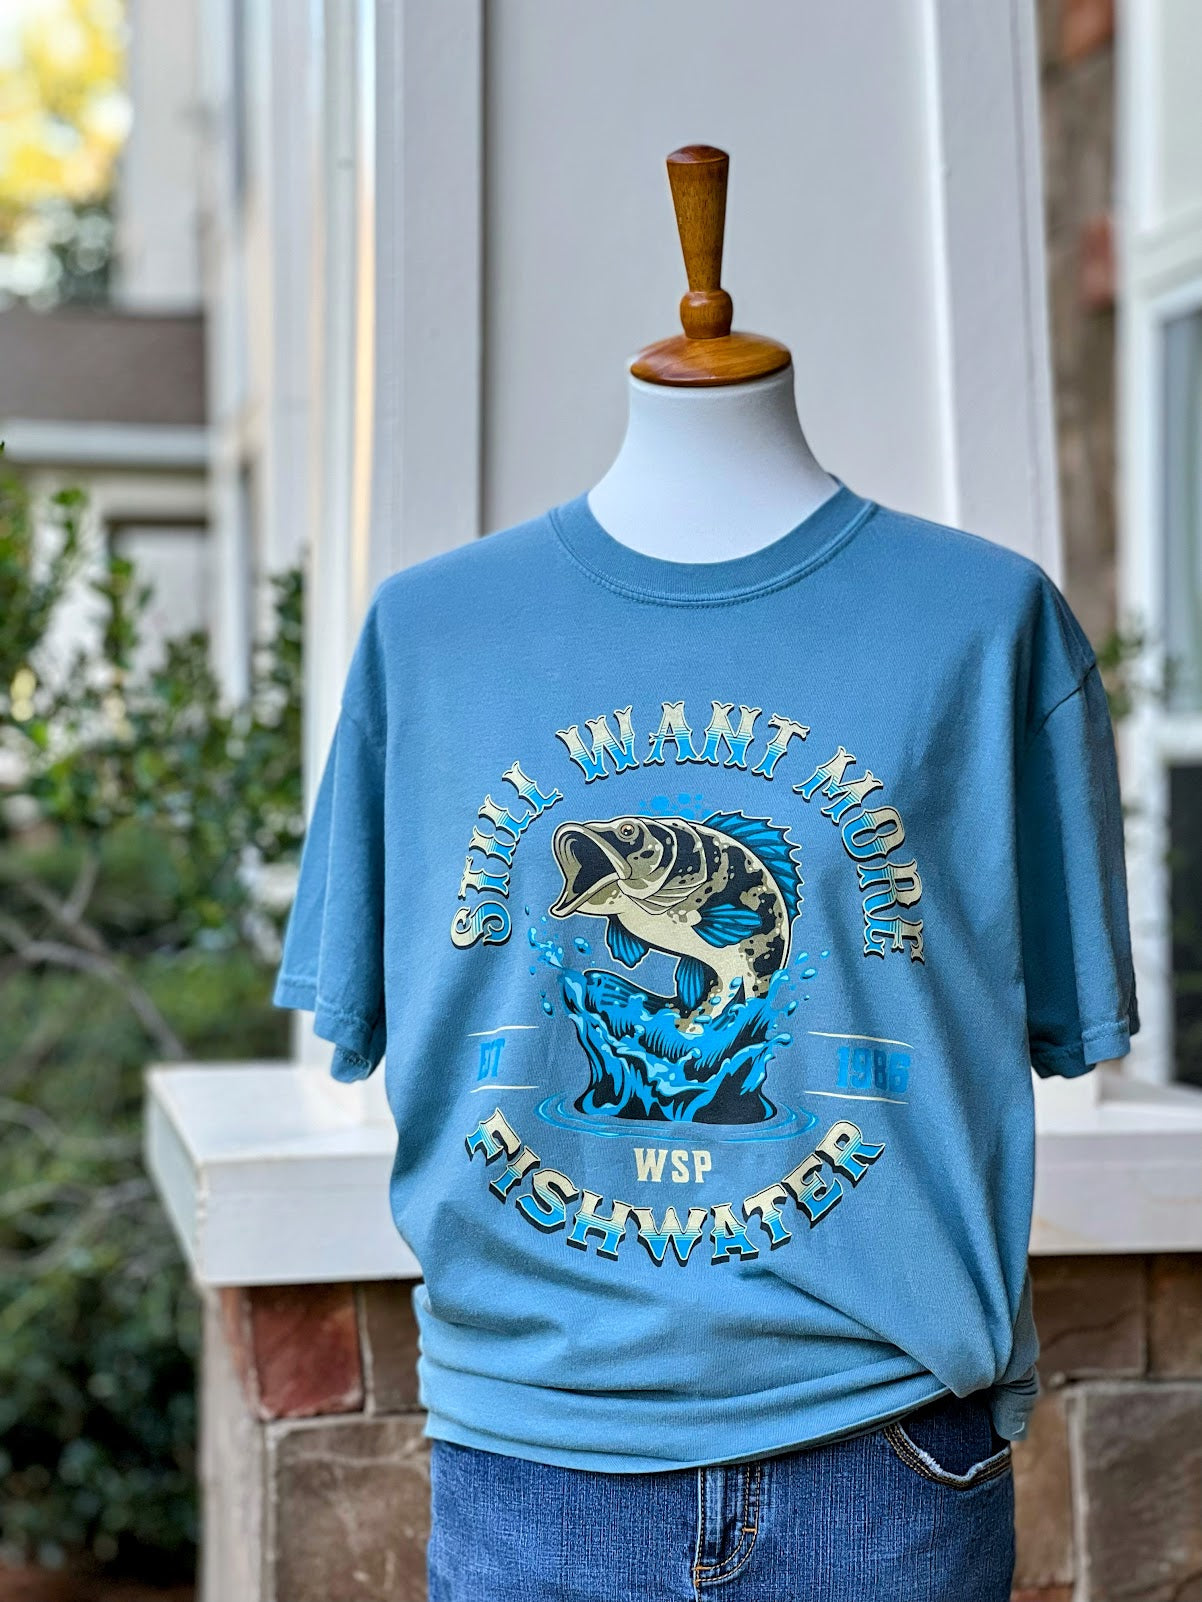 Widespread Panic "Fishwater" T-Shirt ( Front Design )